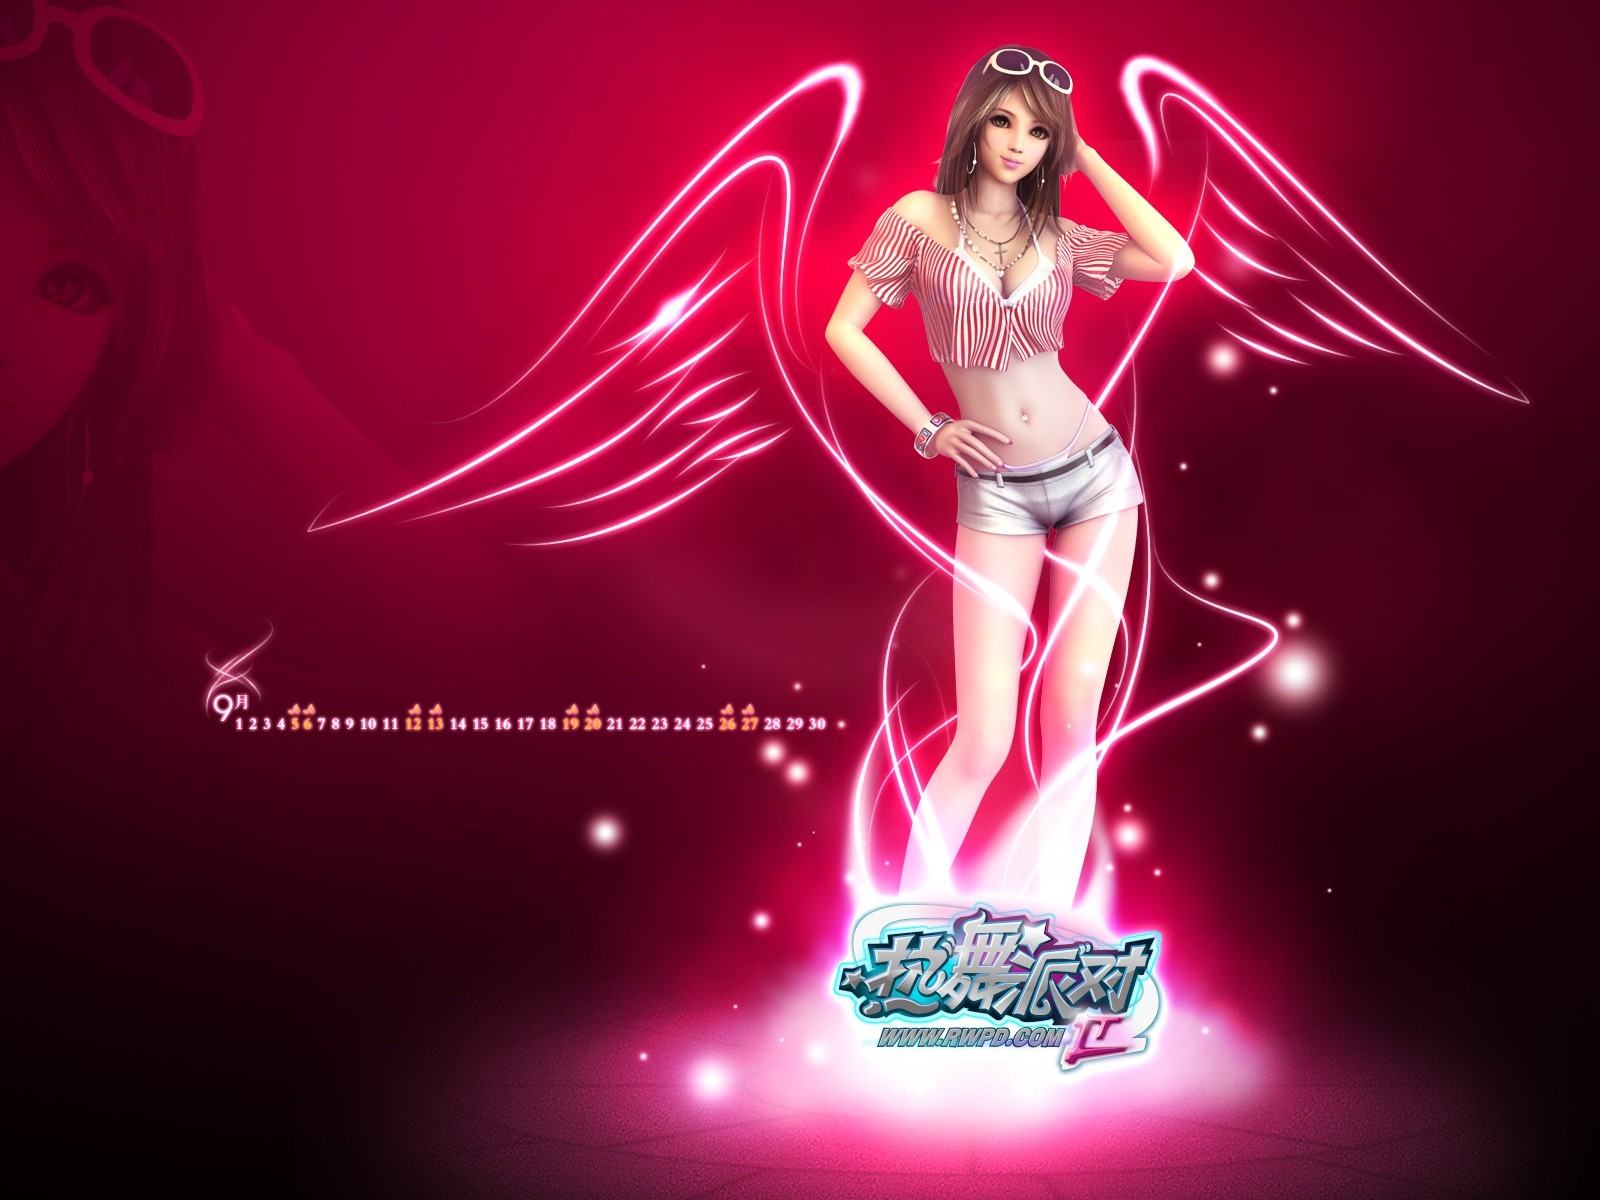 Online game Hot Dance Party II official wallpapers #2 - 1600x1200